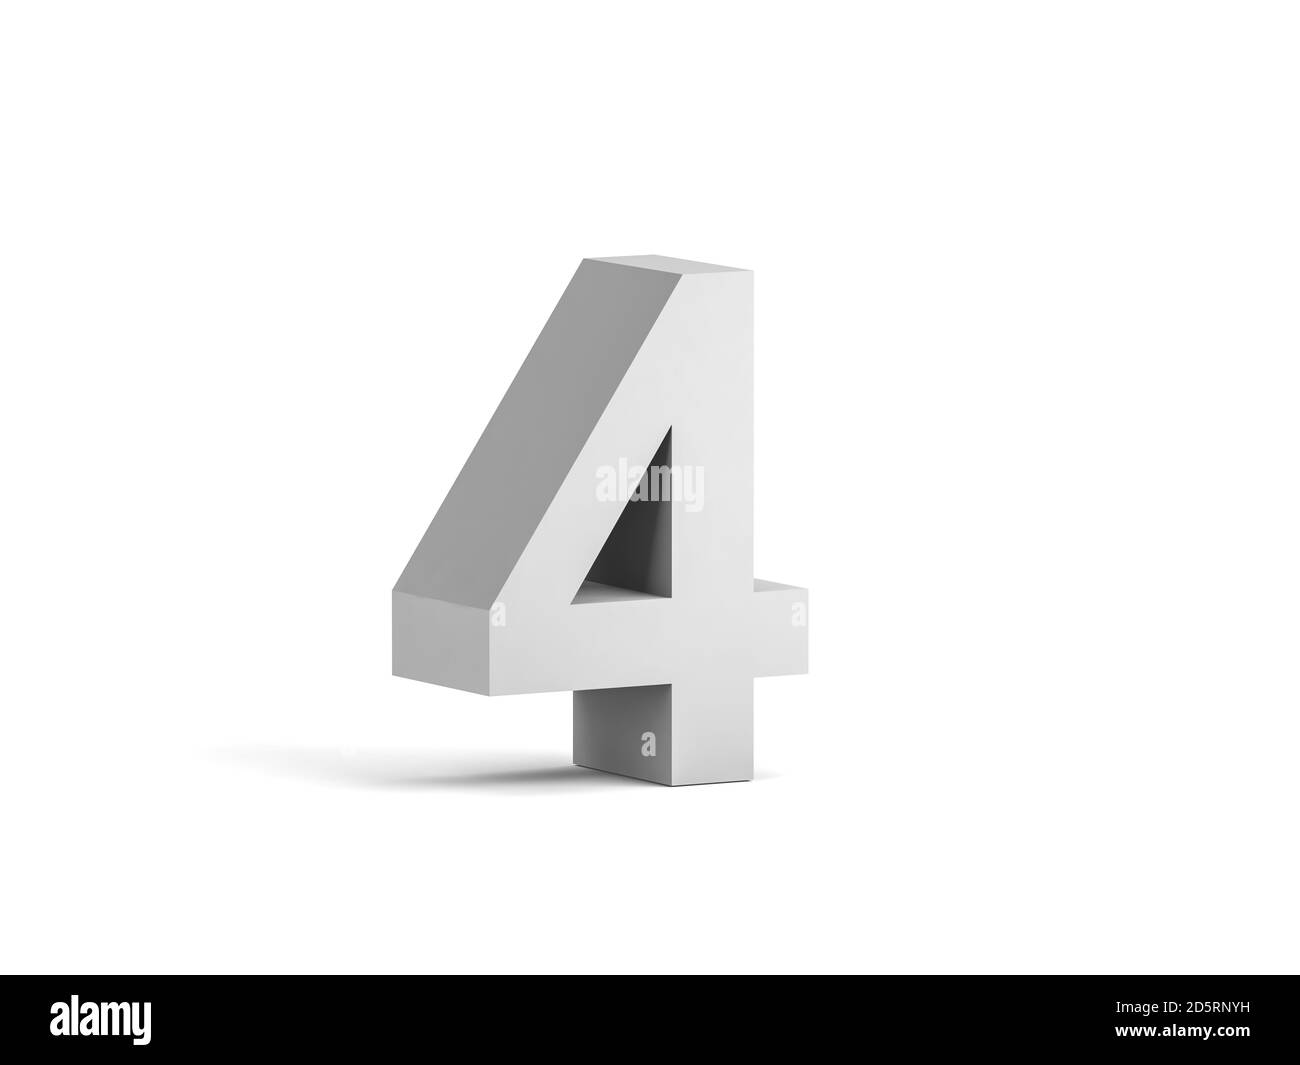 White bold digit 4 isolated on white background with soft shadow, 3d rendering illustration Stock Photo